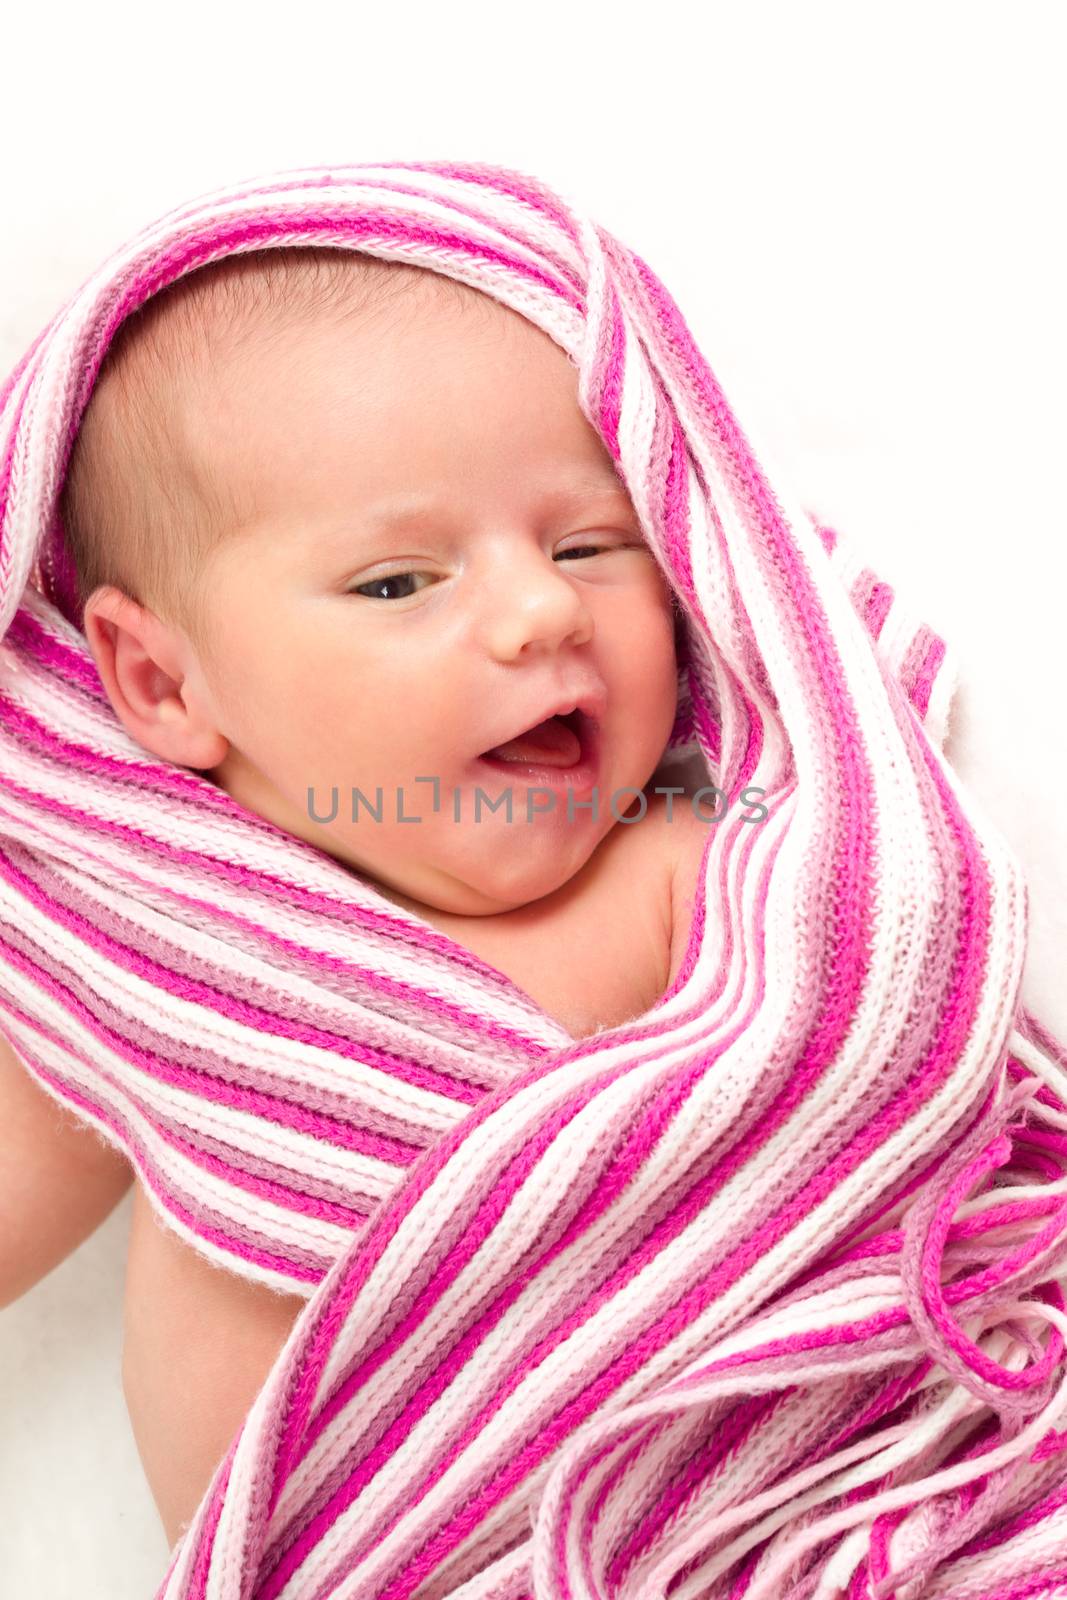 smiling newborn baby - the first week of the new life